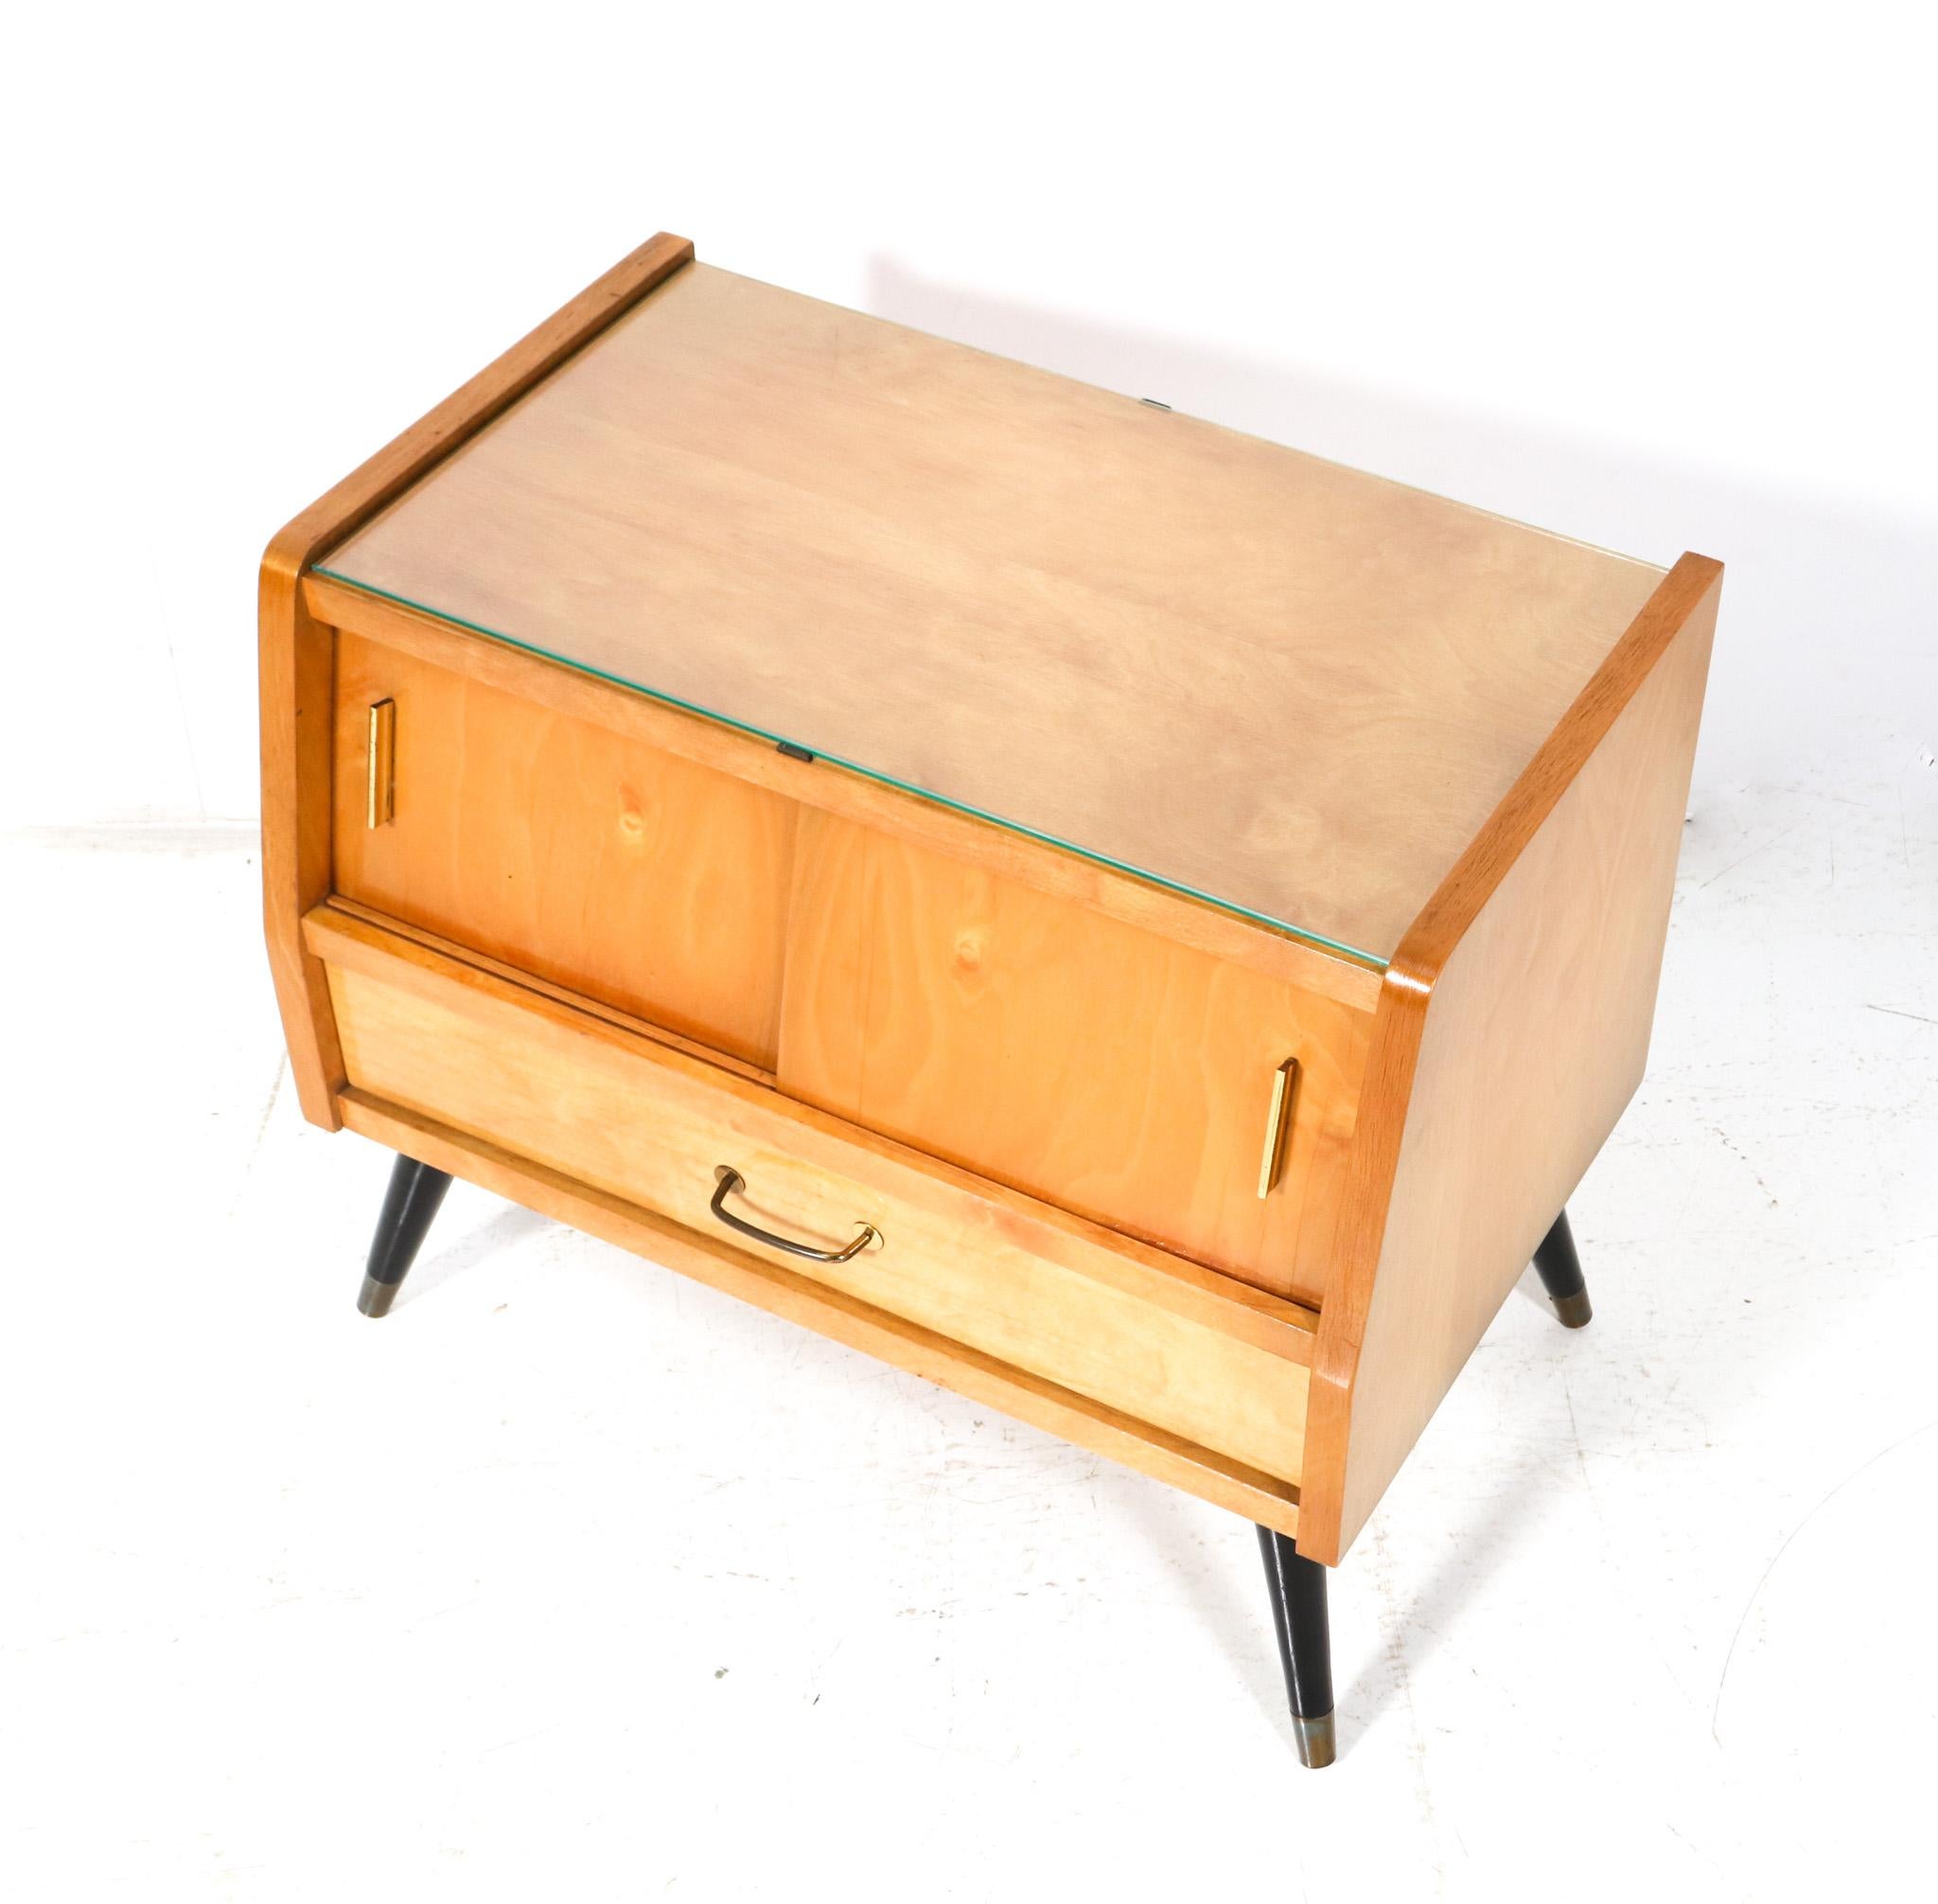  Mid-Century Modern Italian Nightstands or Bedside Tables, 1960s For Sale 3